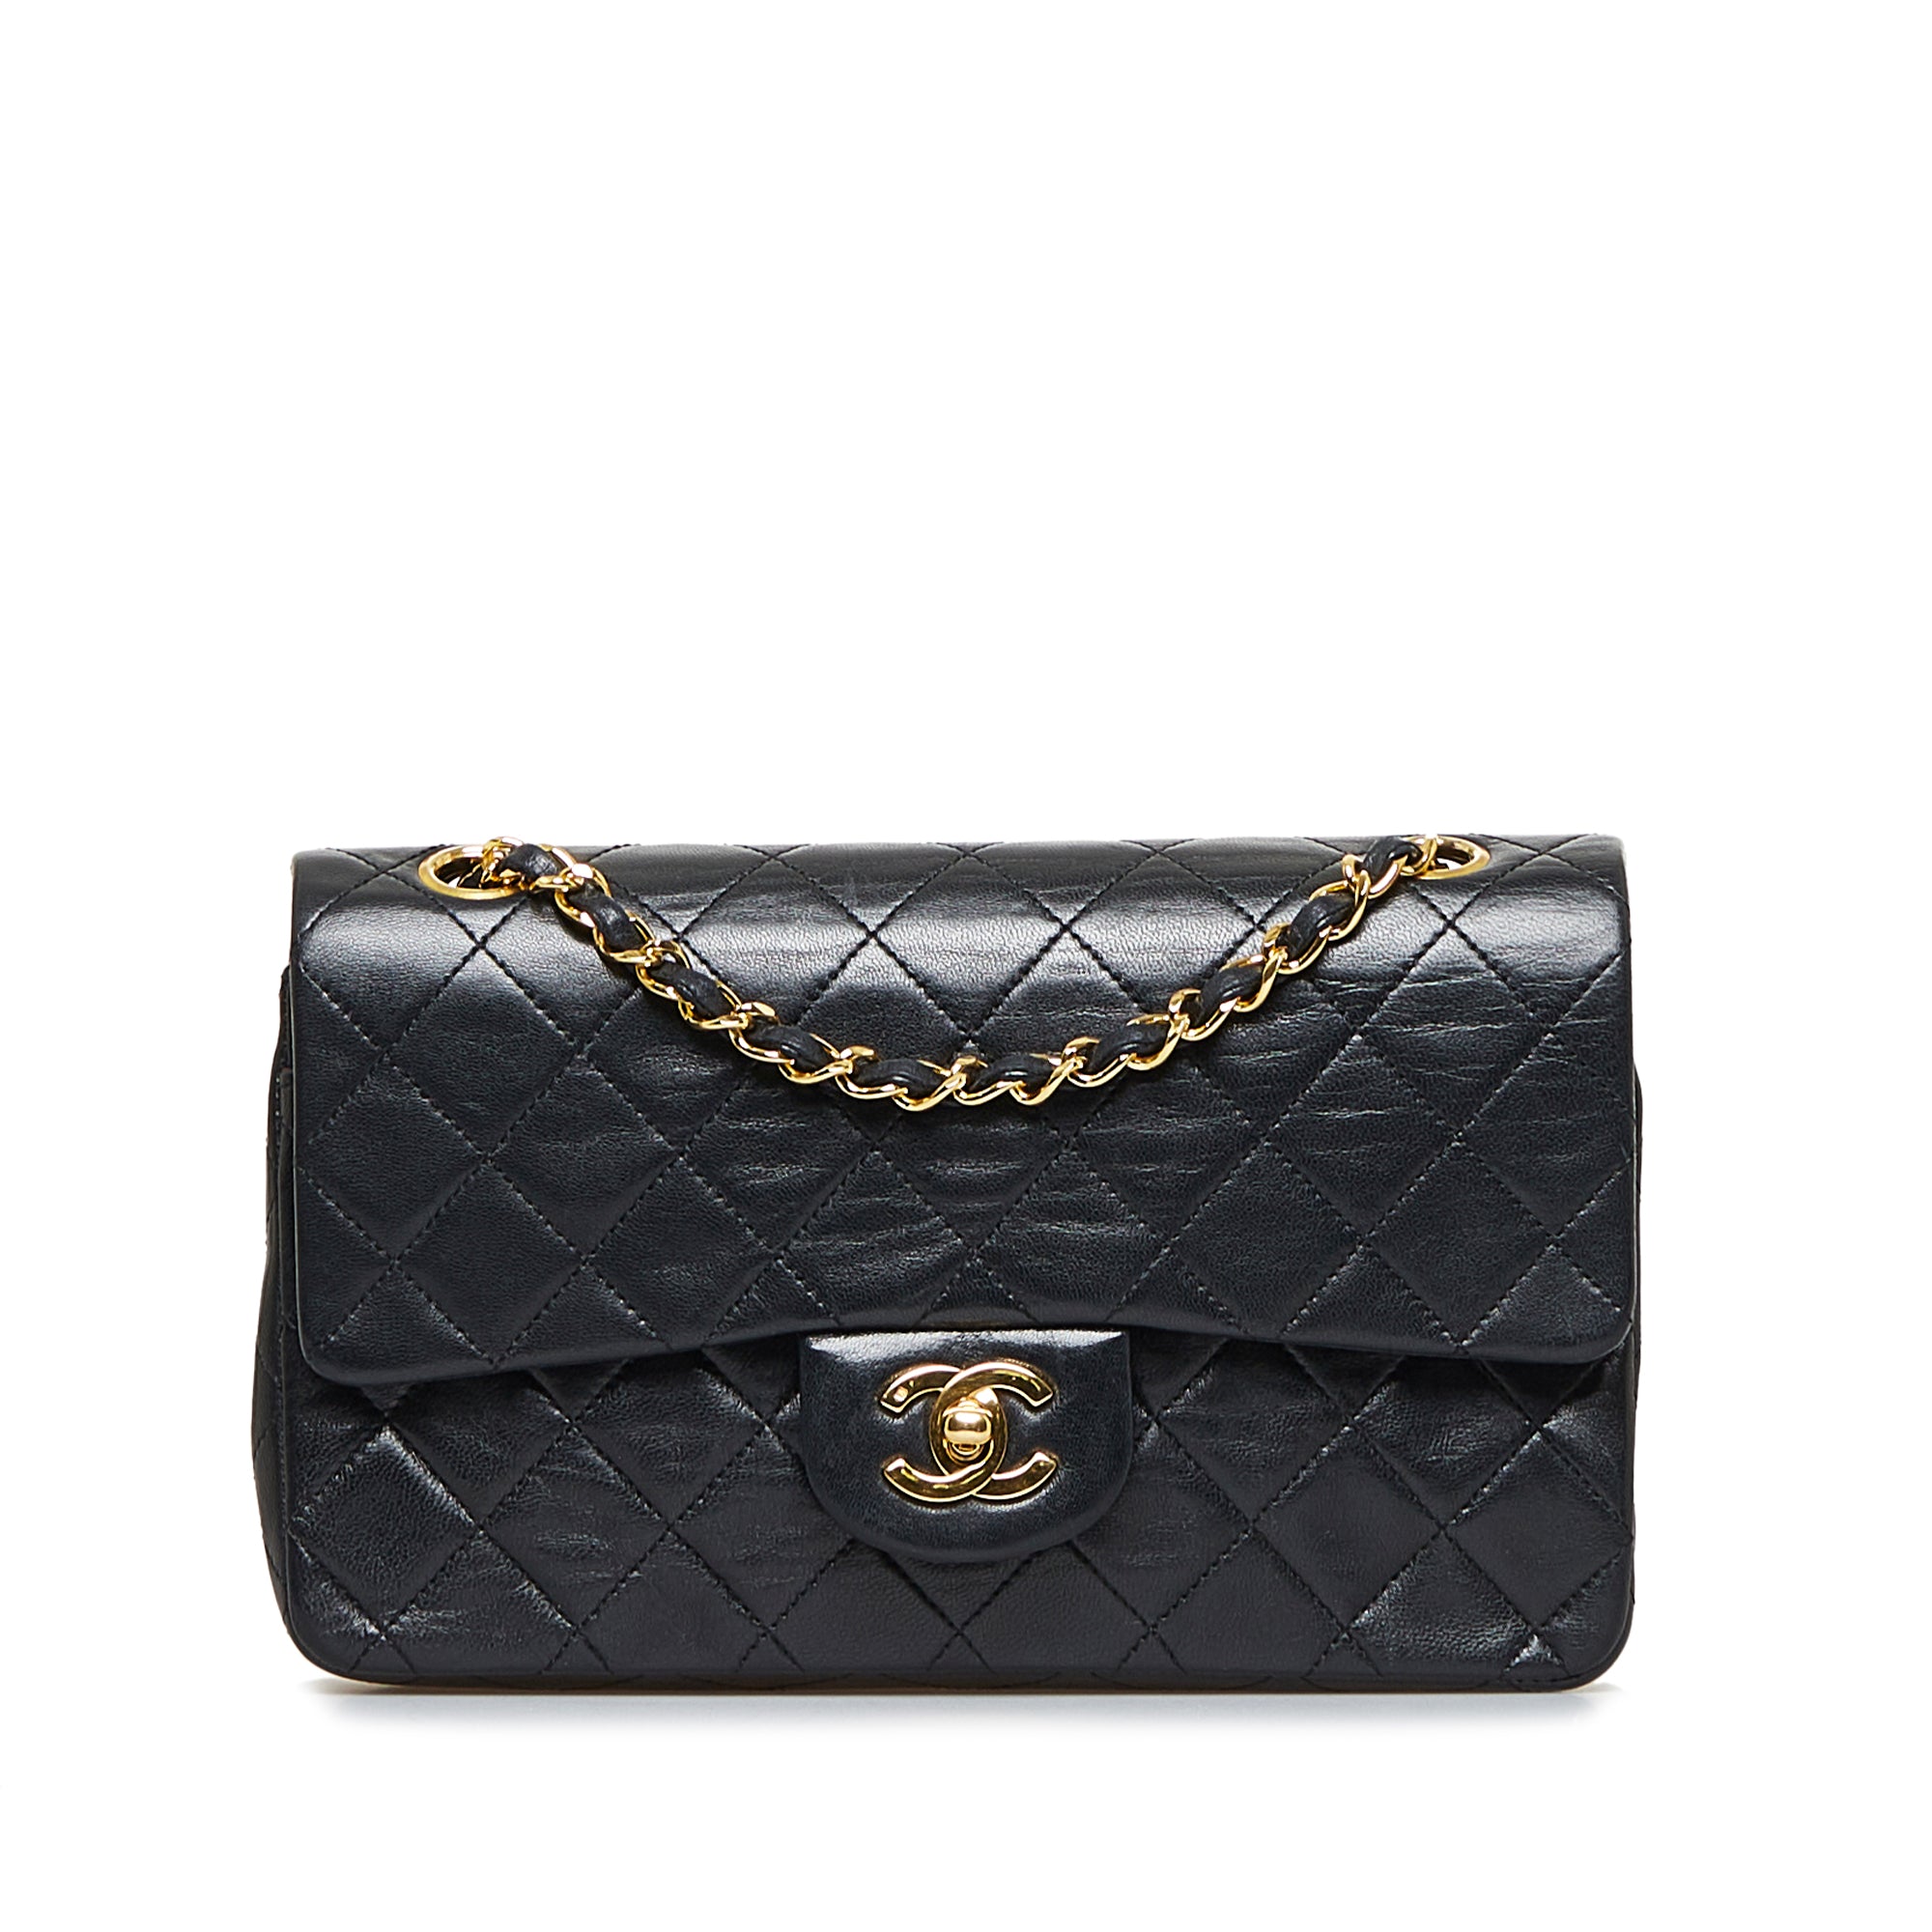 Black Chanel Small Classic Lambskin Double Flap Shoulder Bag, chanel  shopping ptt handbag in pink quilted grained leather